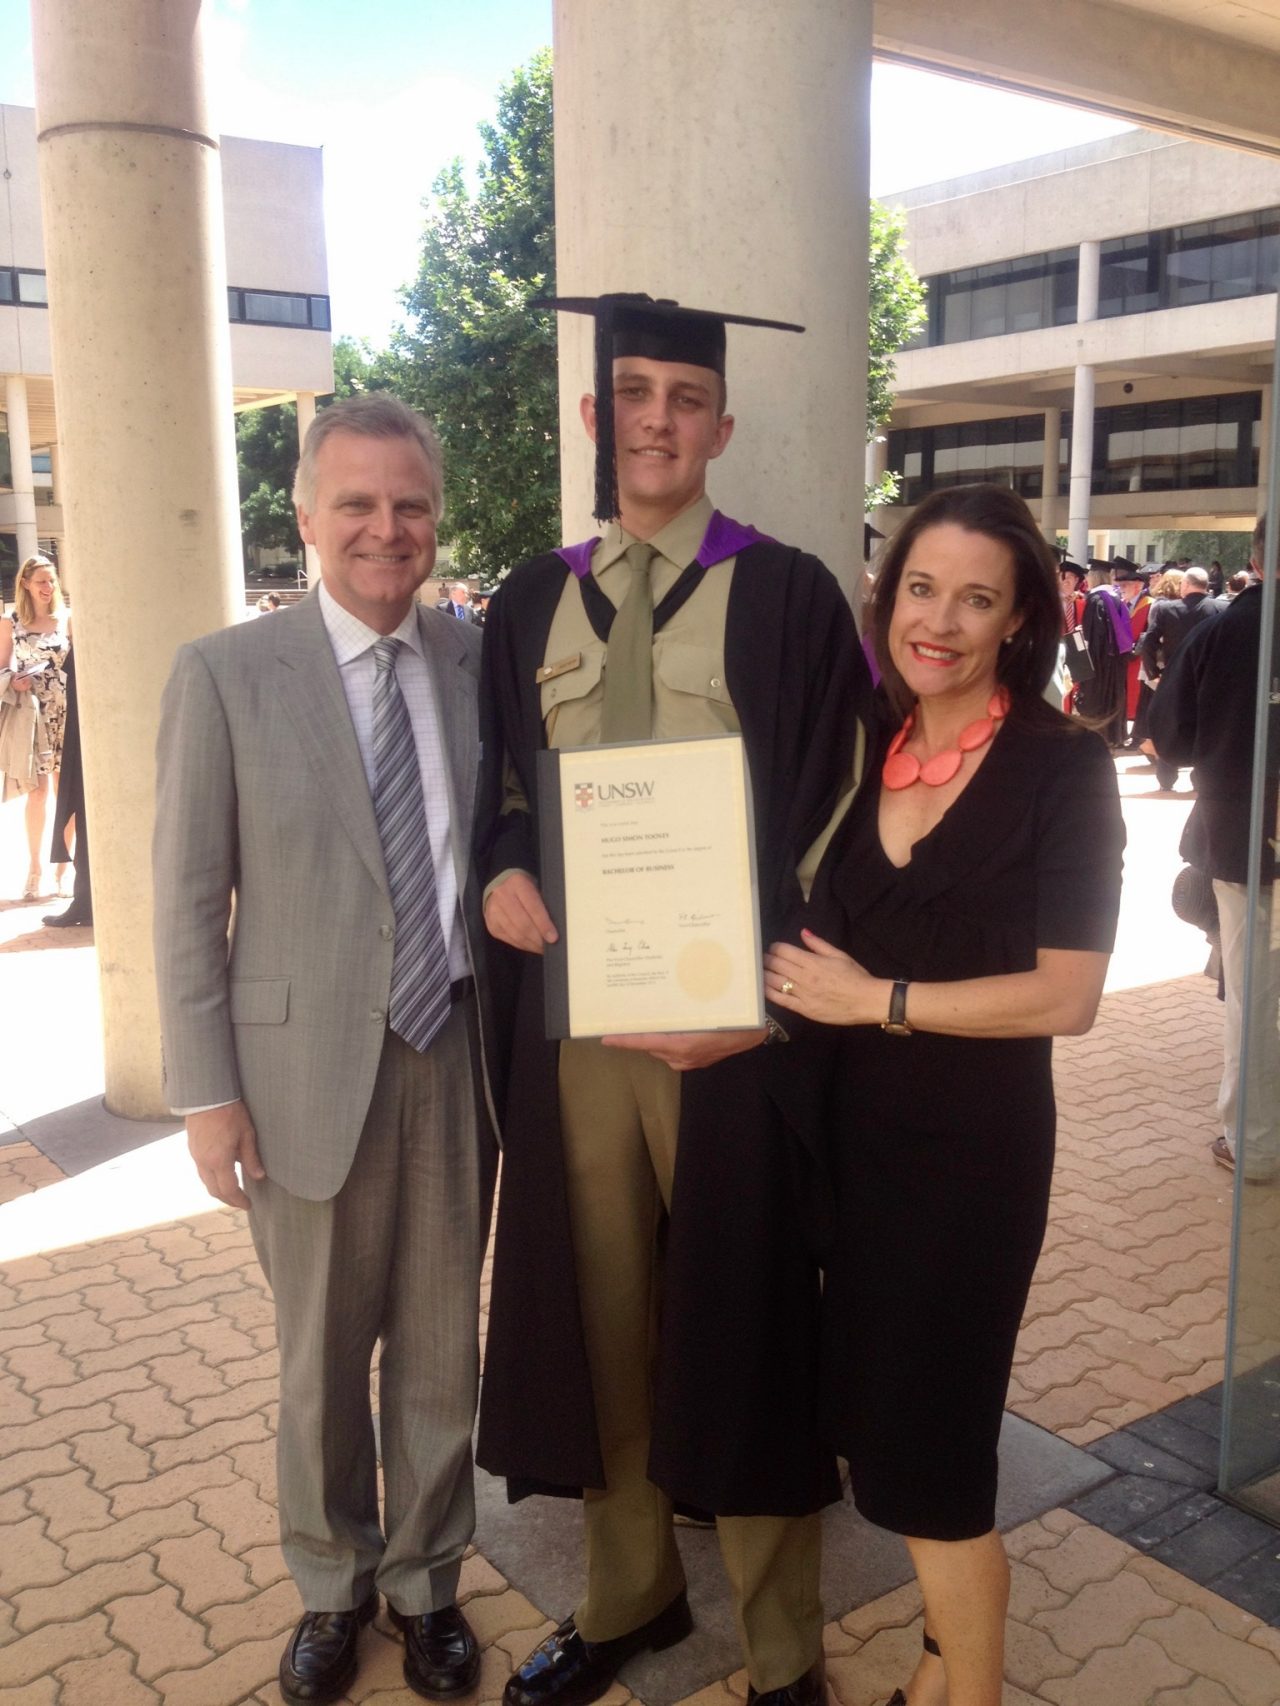 Hugo Toovey with his parents at his graduation from UNSW Canberra.